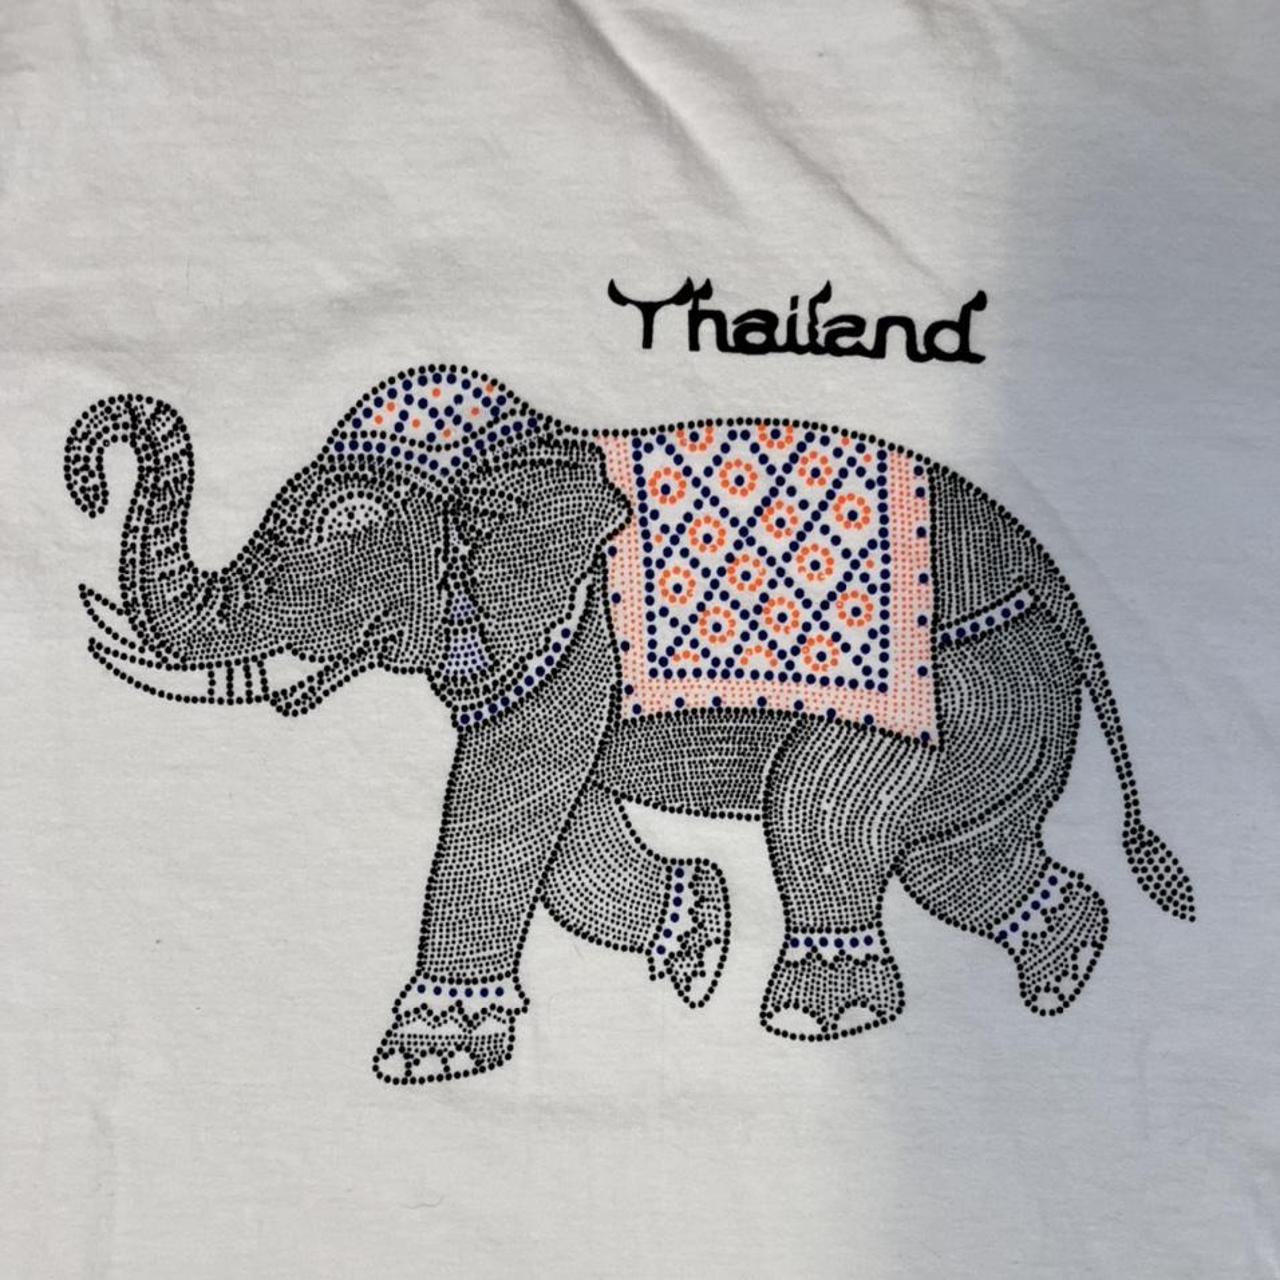 Product Image 2 - Vintage Thailand T-shirt

✅Great vintage tee